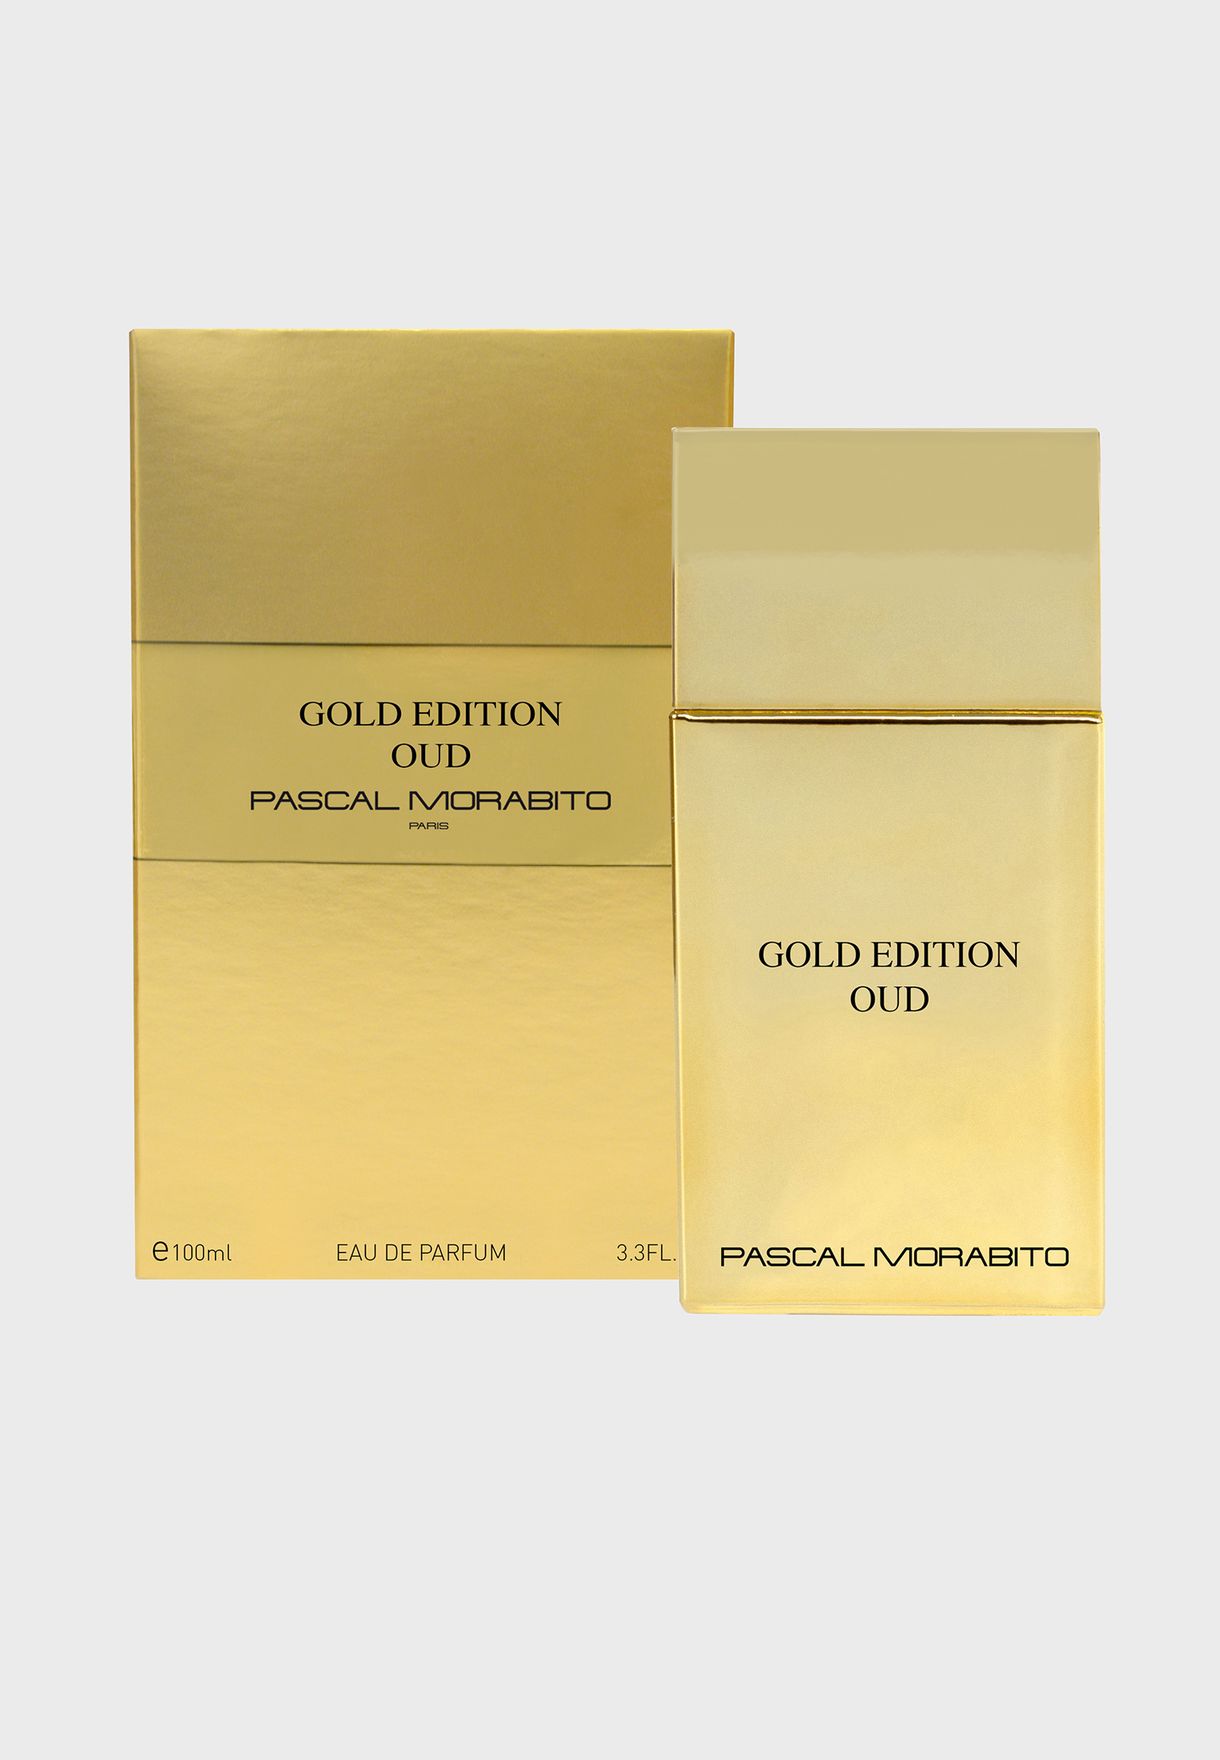 Pascal morabito gold edition oud besorgen